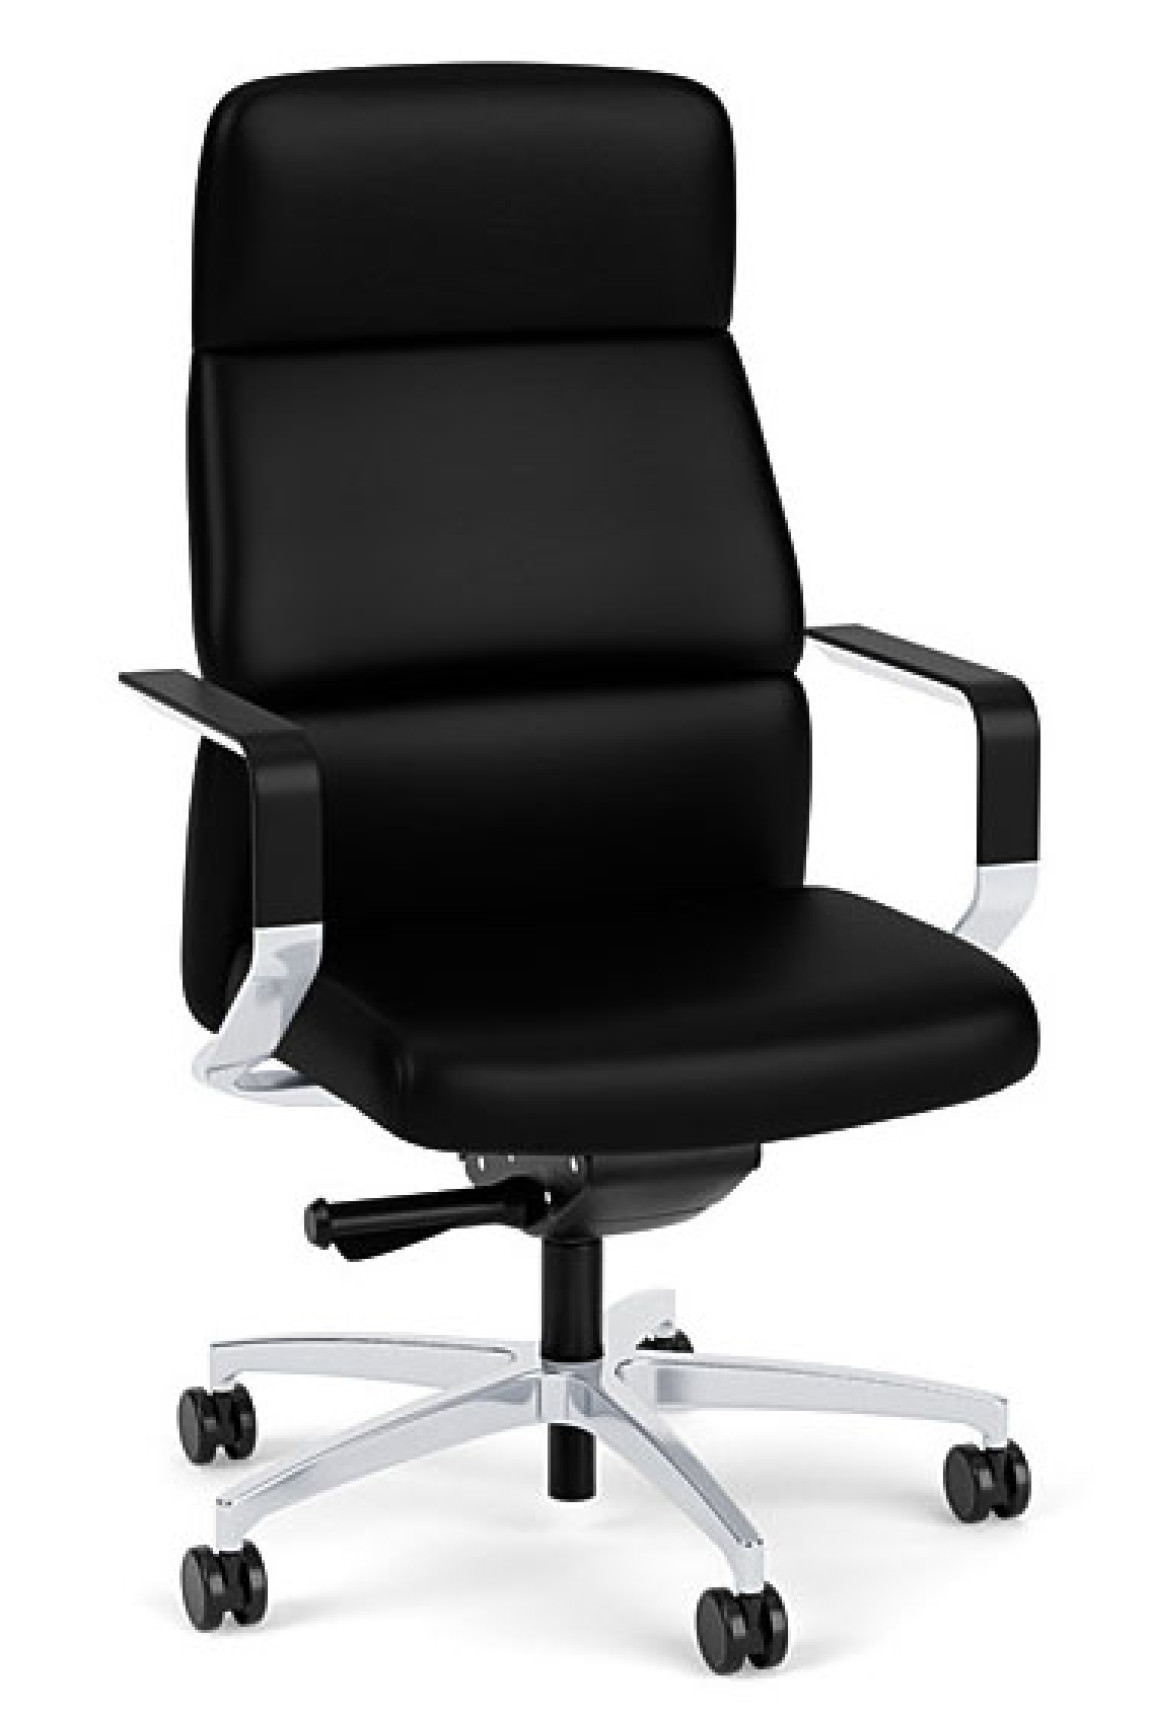 Leather High Back Conference Room Chair